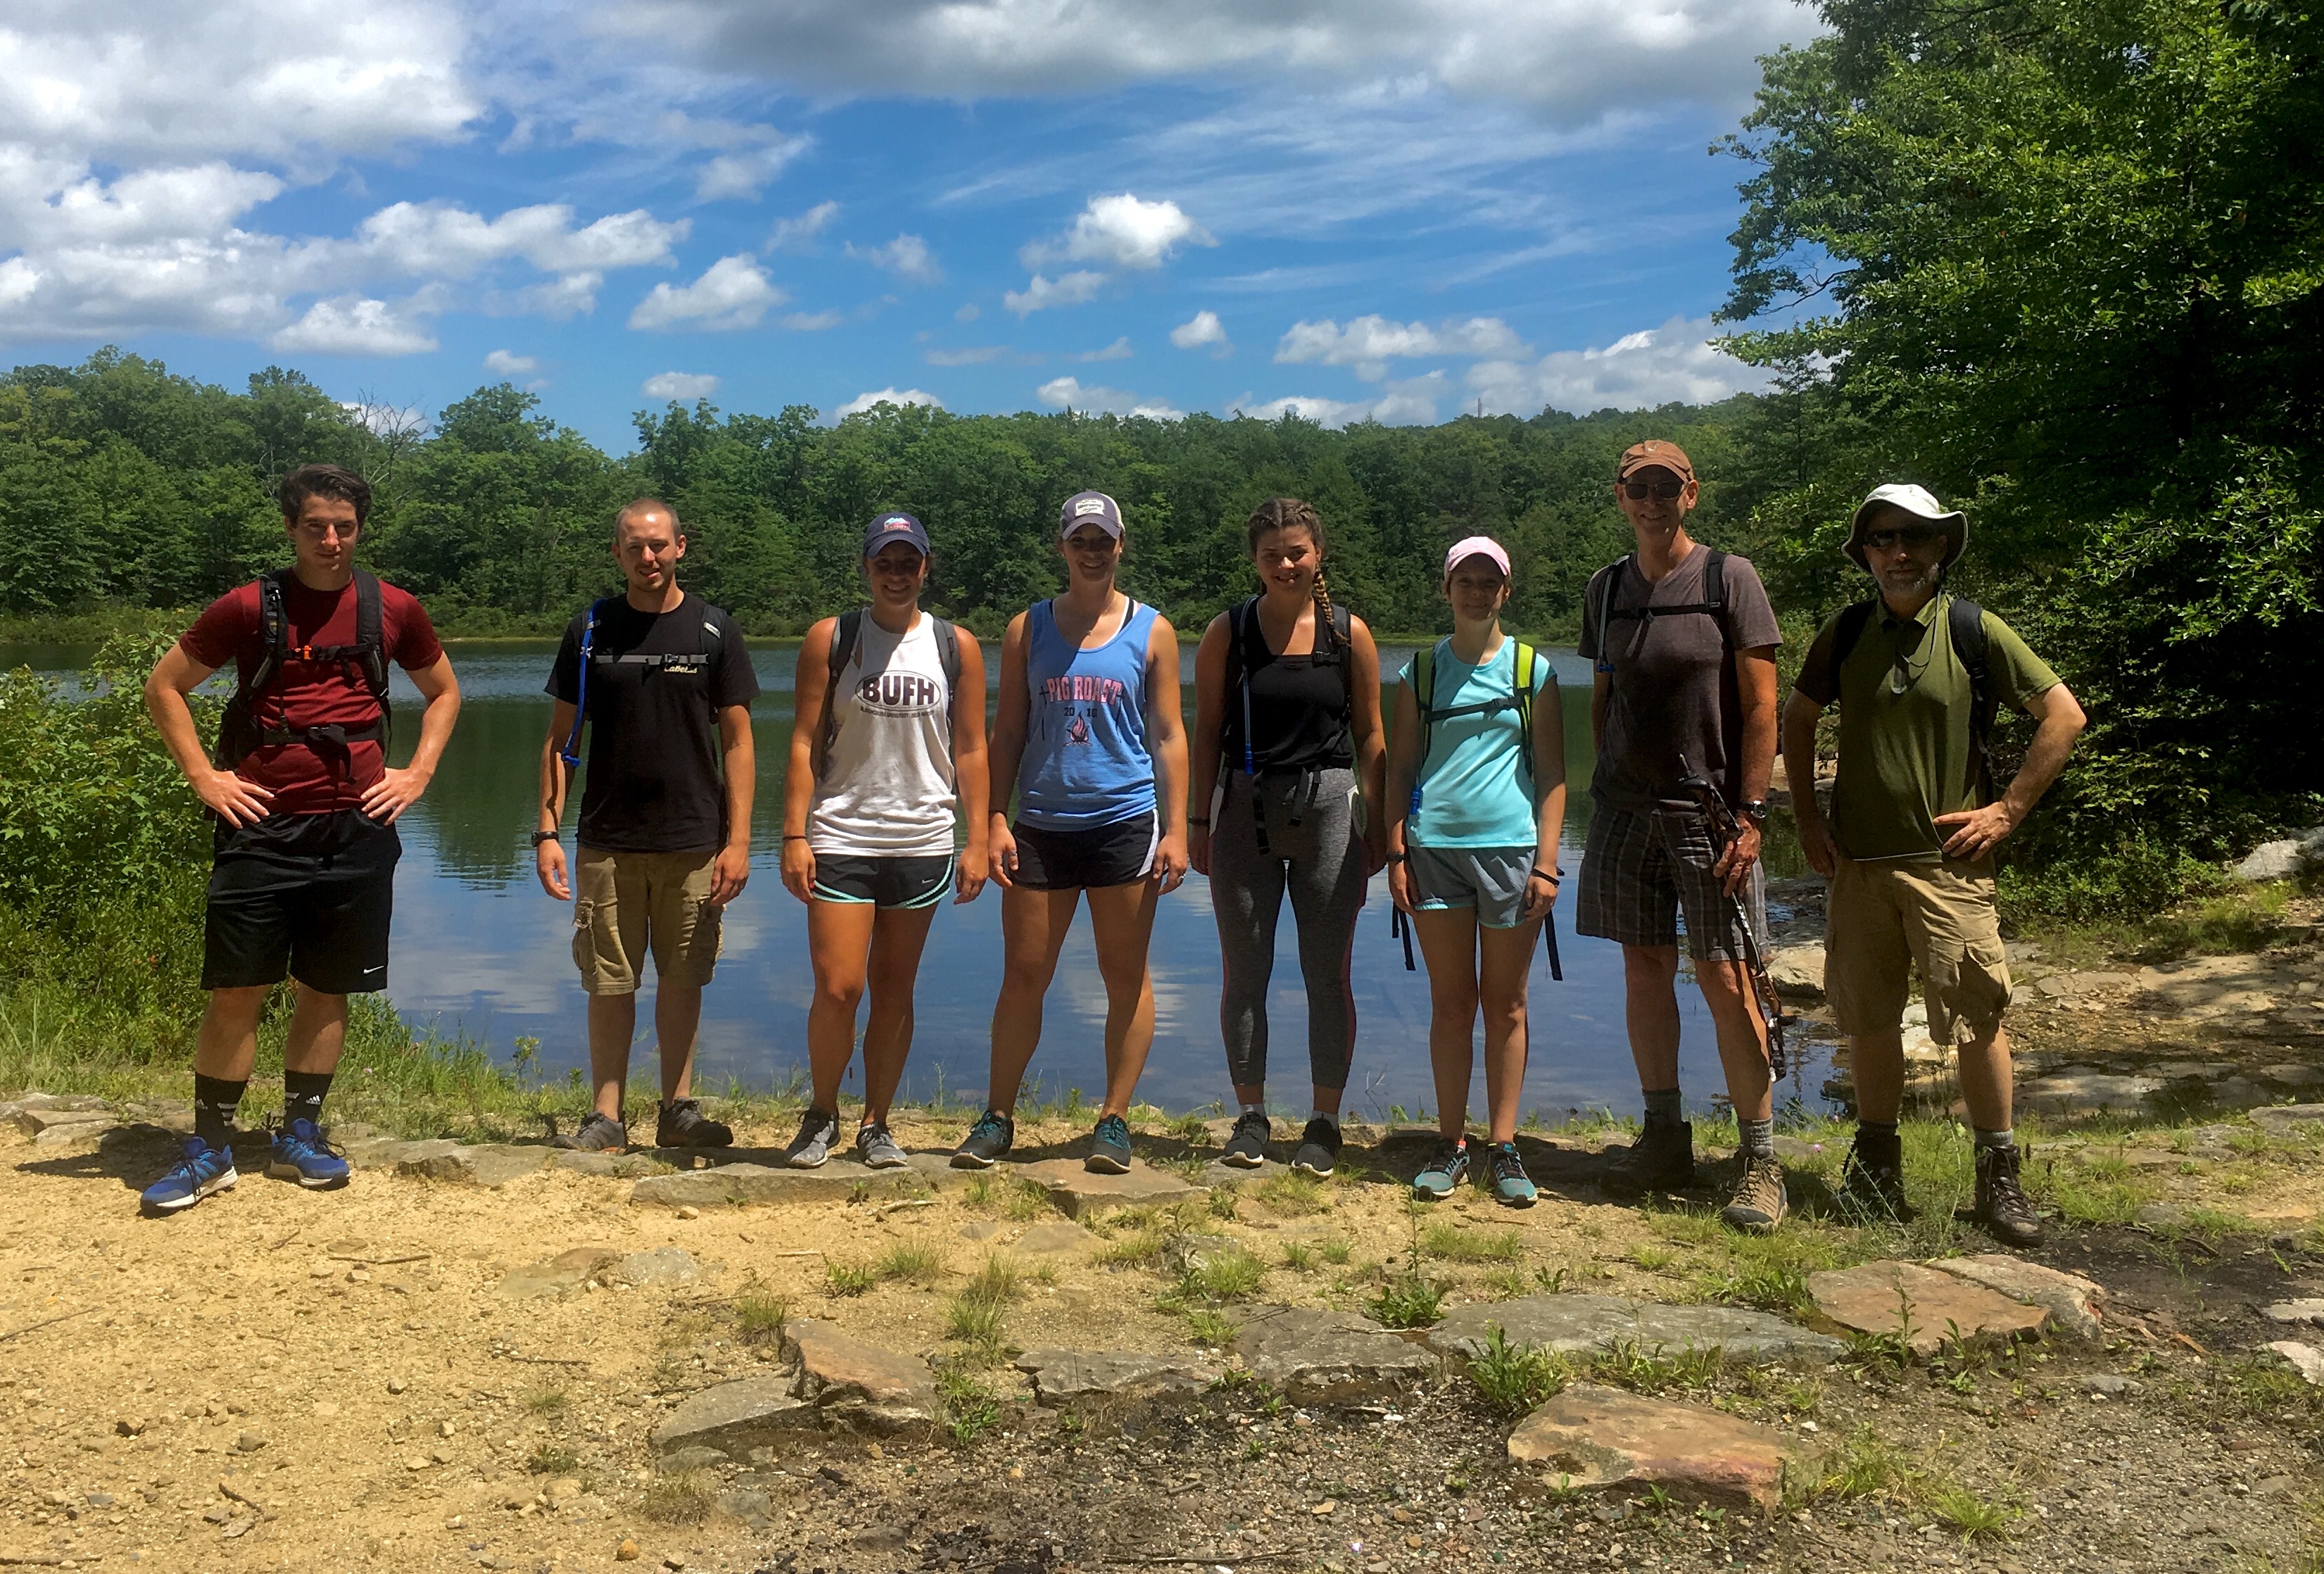 The EP NEPA crew with Biology Faculty Specialist Vince Marshall (right) and EP 2015 alumni Gabby Prezkop and Marissa D'Avignon (2nd and 3rd from left, respect.)